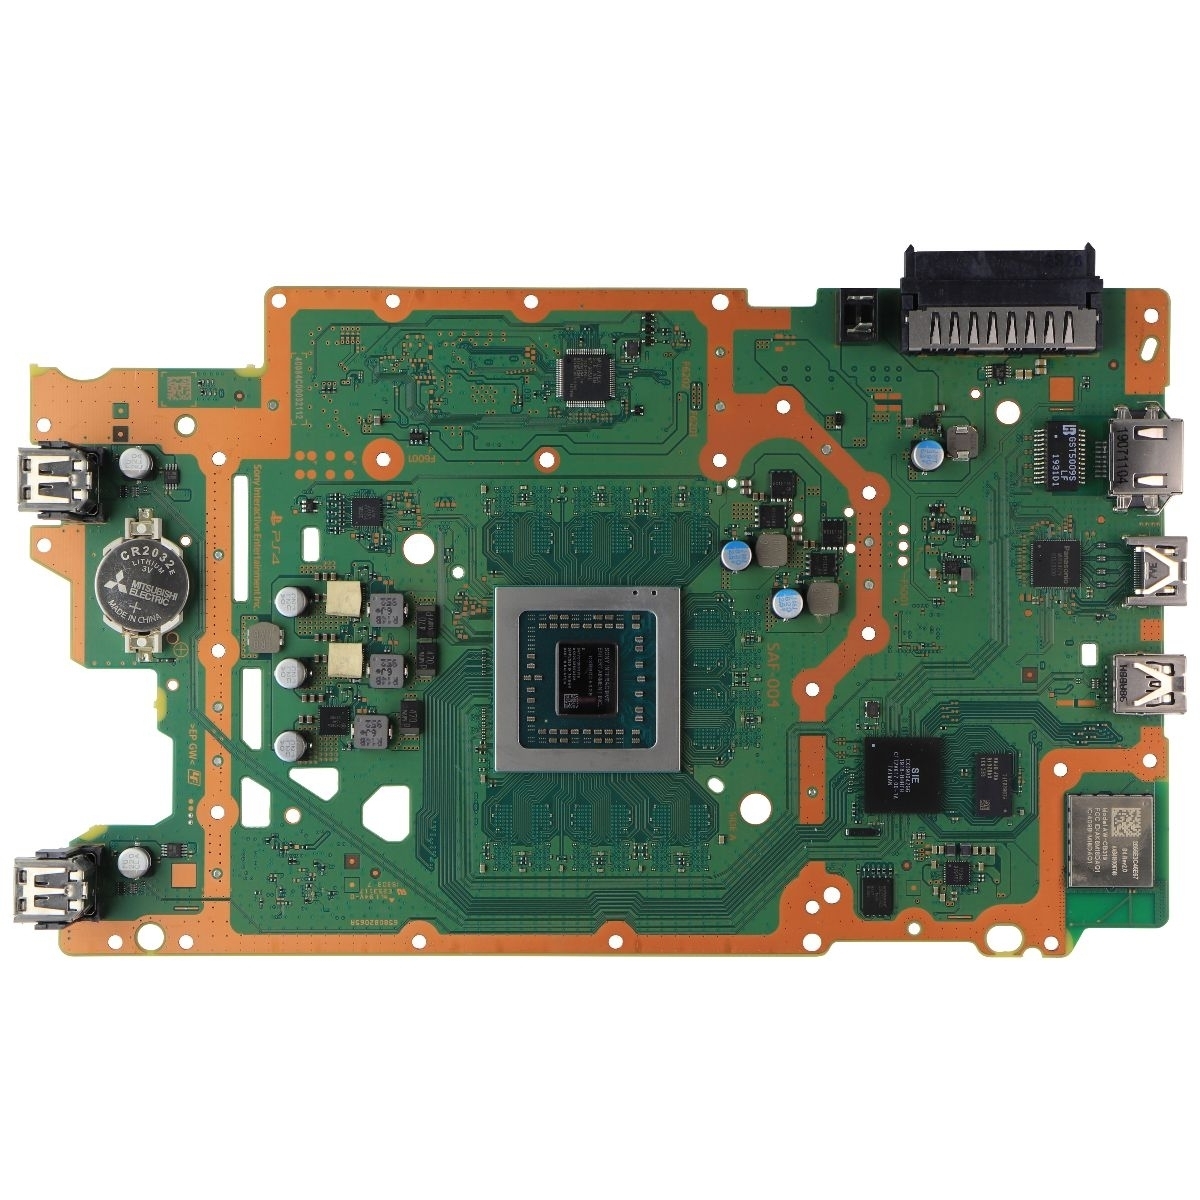 Sony Playstation 4 Slim OEM Replacement Motherboard (SAF-004) For CUH-2215B/2115 (Refurbished)